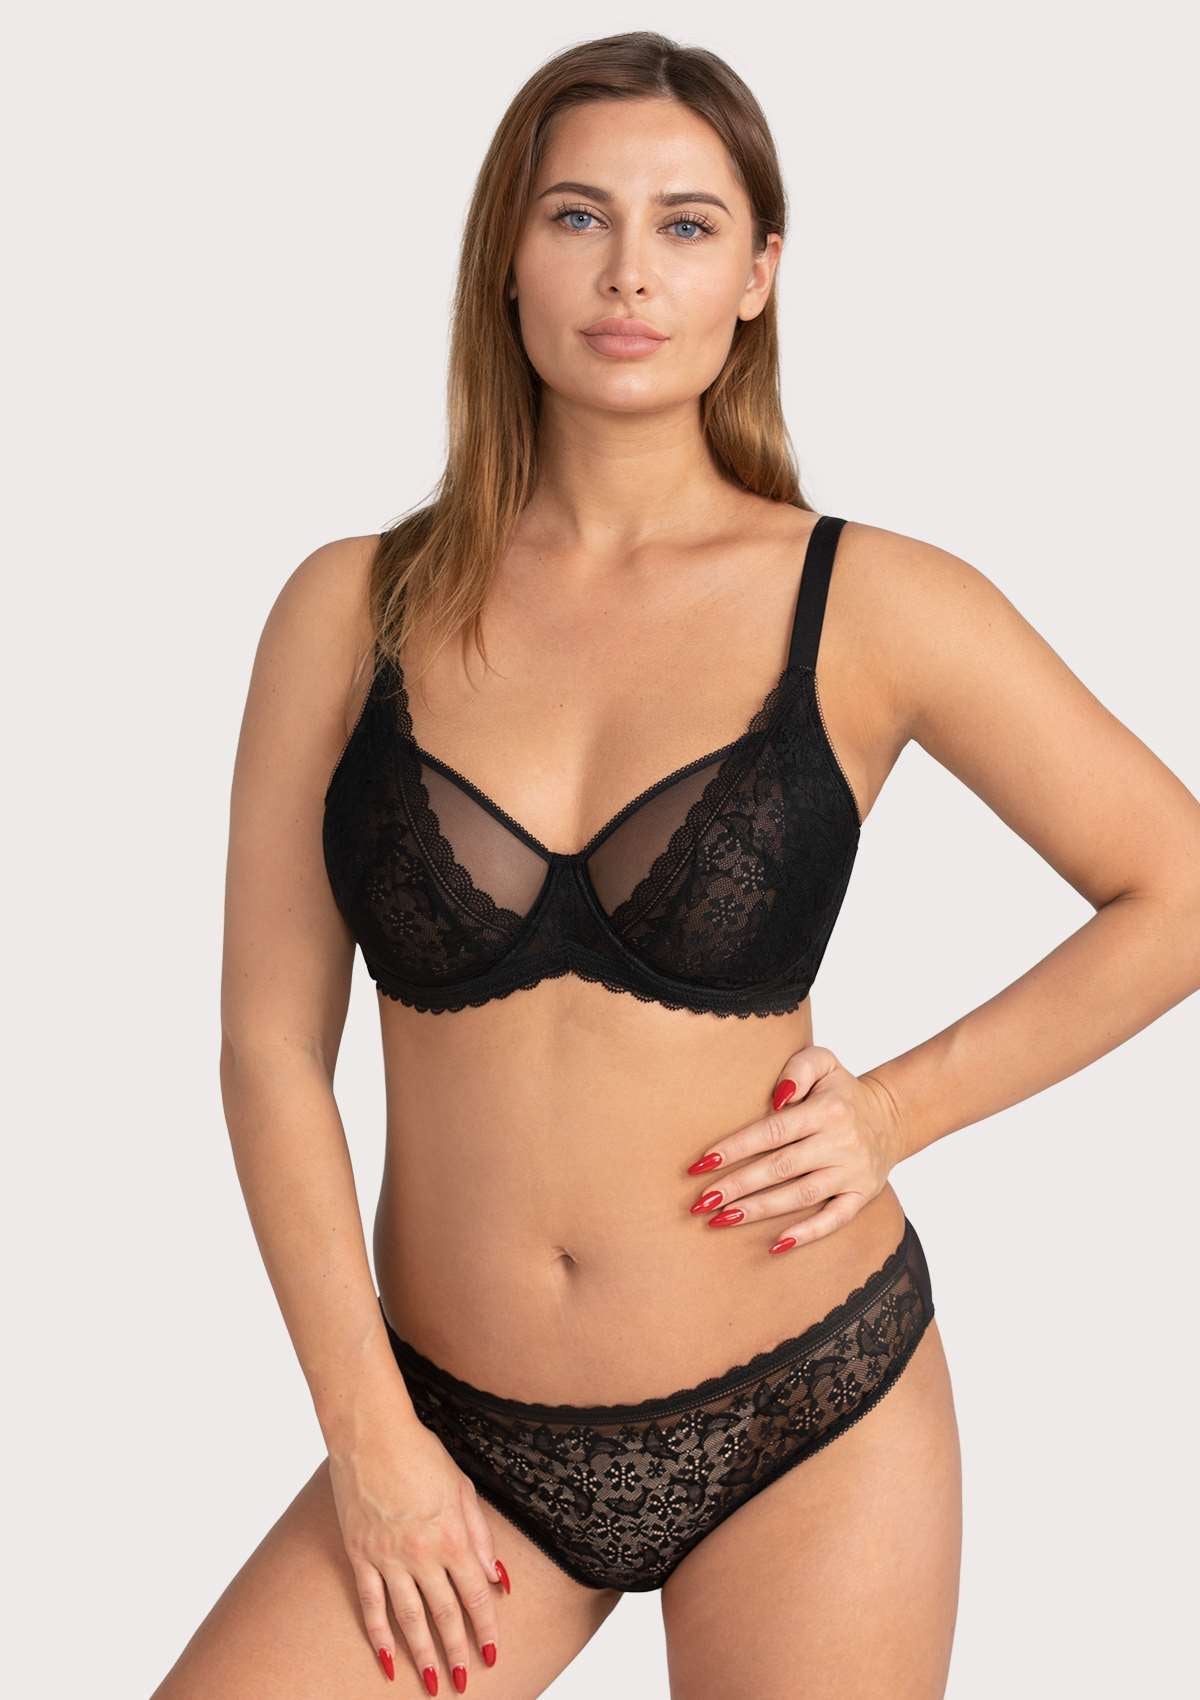 HSIA Anemone Lace Bra And Panties: Back Support Wired Bra - Black / 38 / D